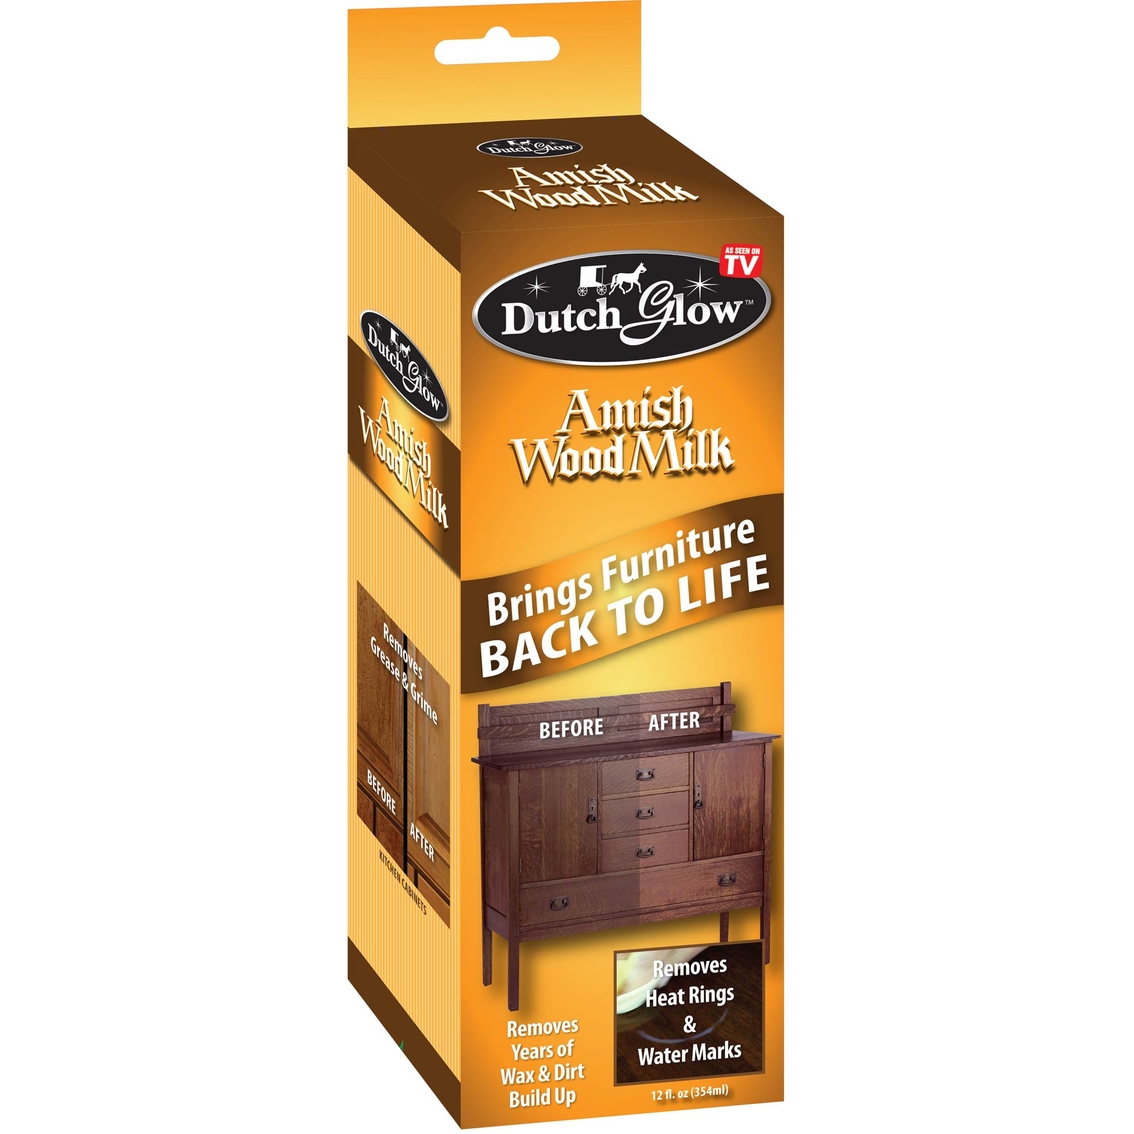 Dutch Glow Amish Wood Milk Infomercial Products More